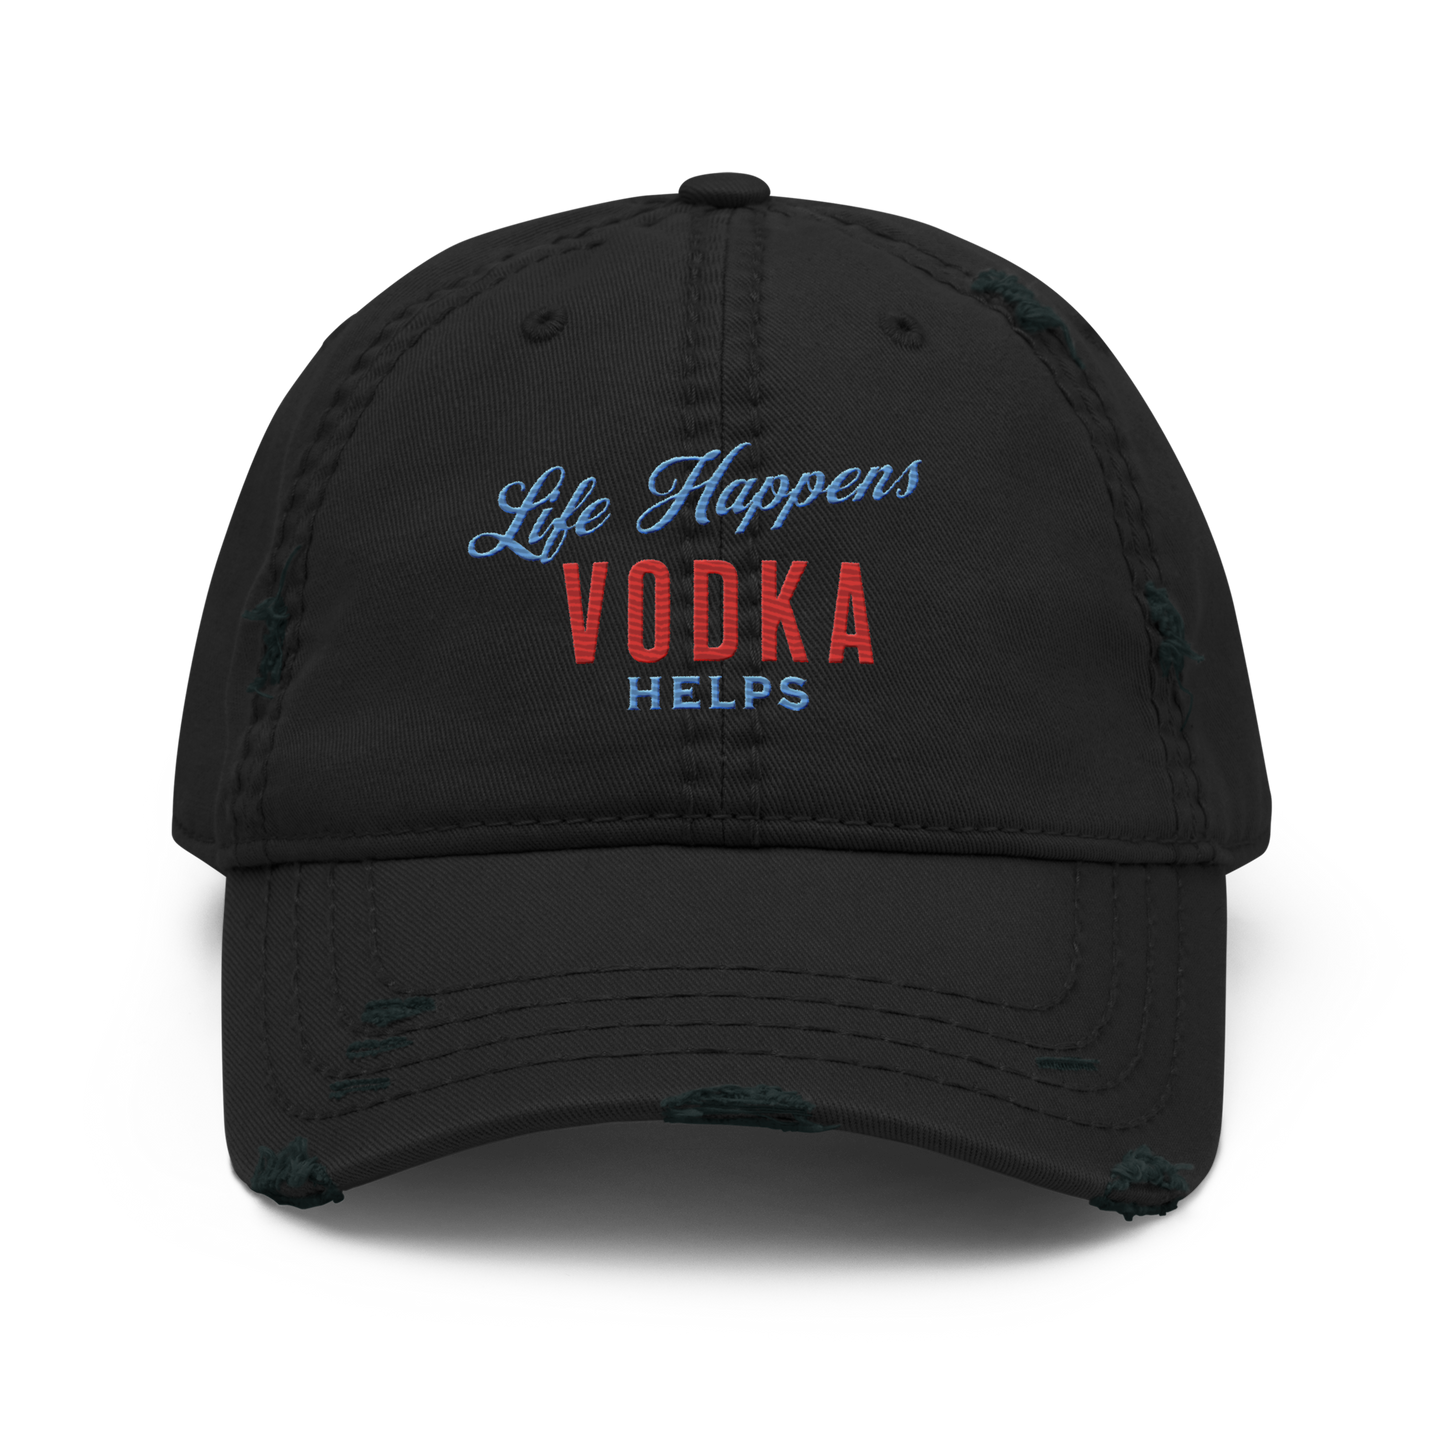 Life Happens Vodka Helps Dad Hat - Perfect For Casual Days DISTRESSED DAD HAT,HAT,MENS,New,UNISEX,VODKA,WOMENS